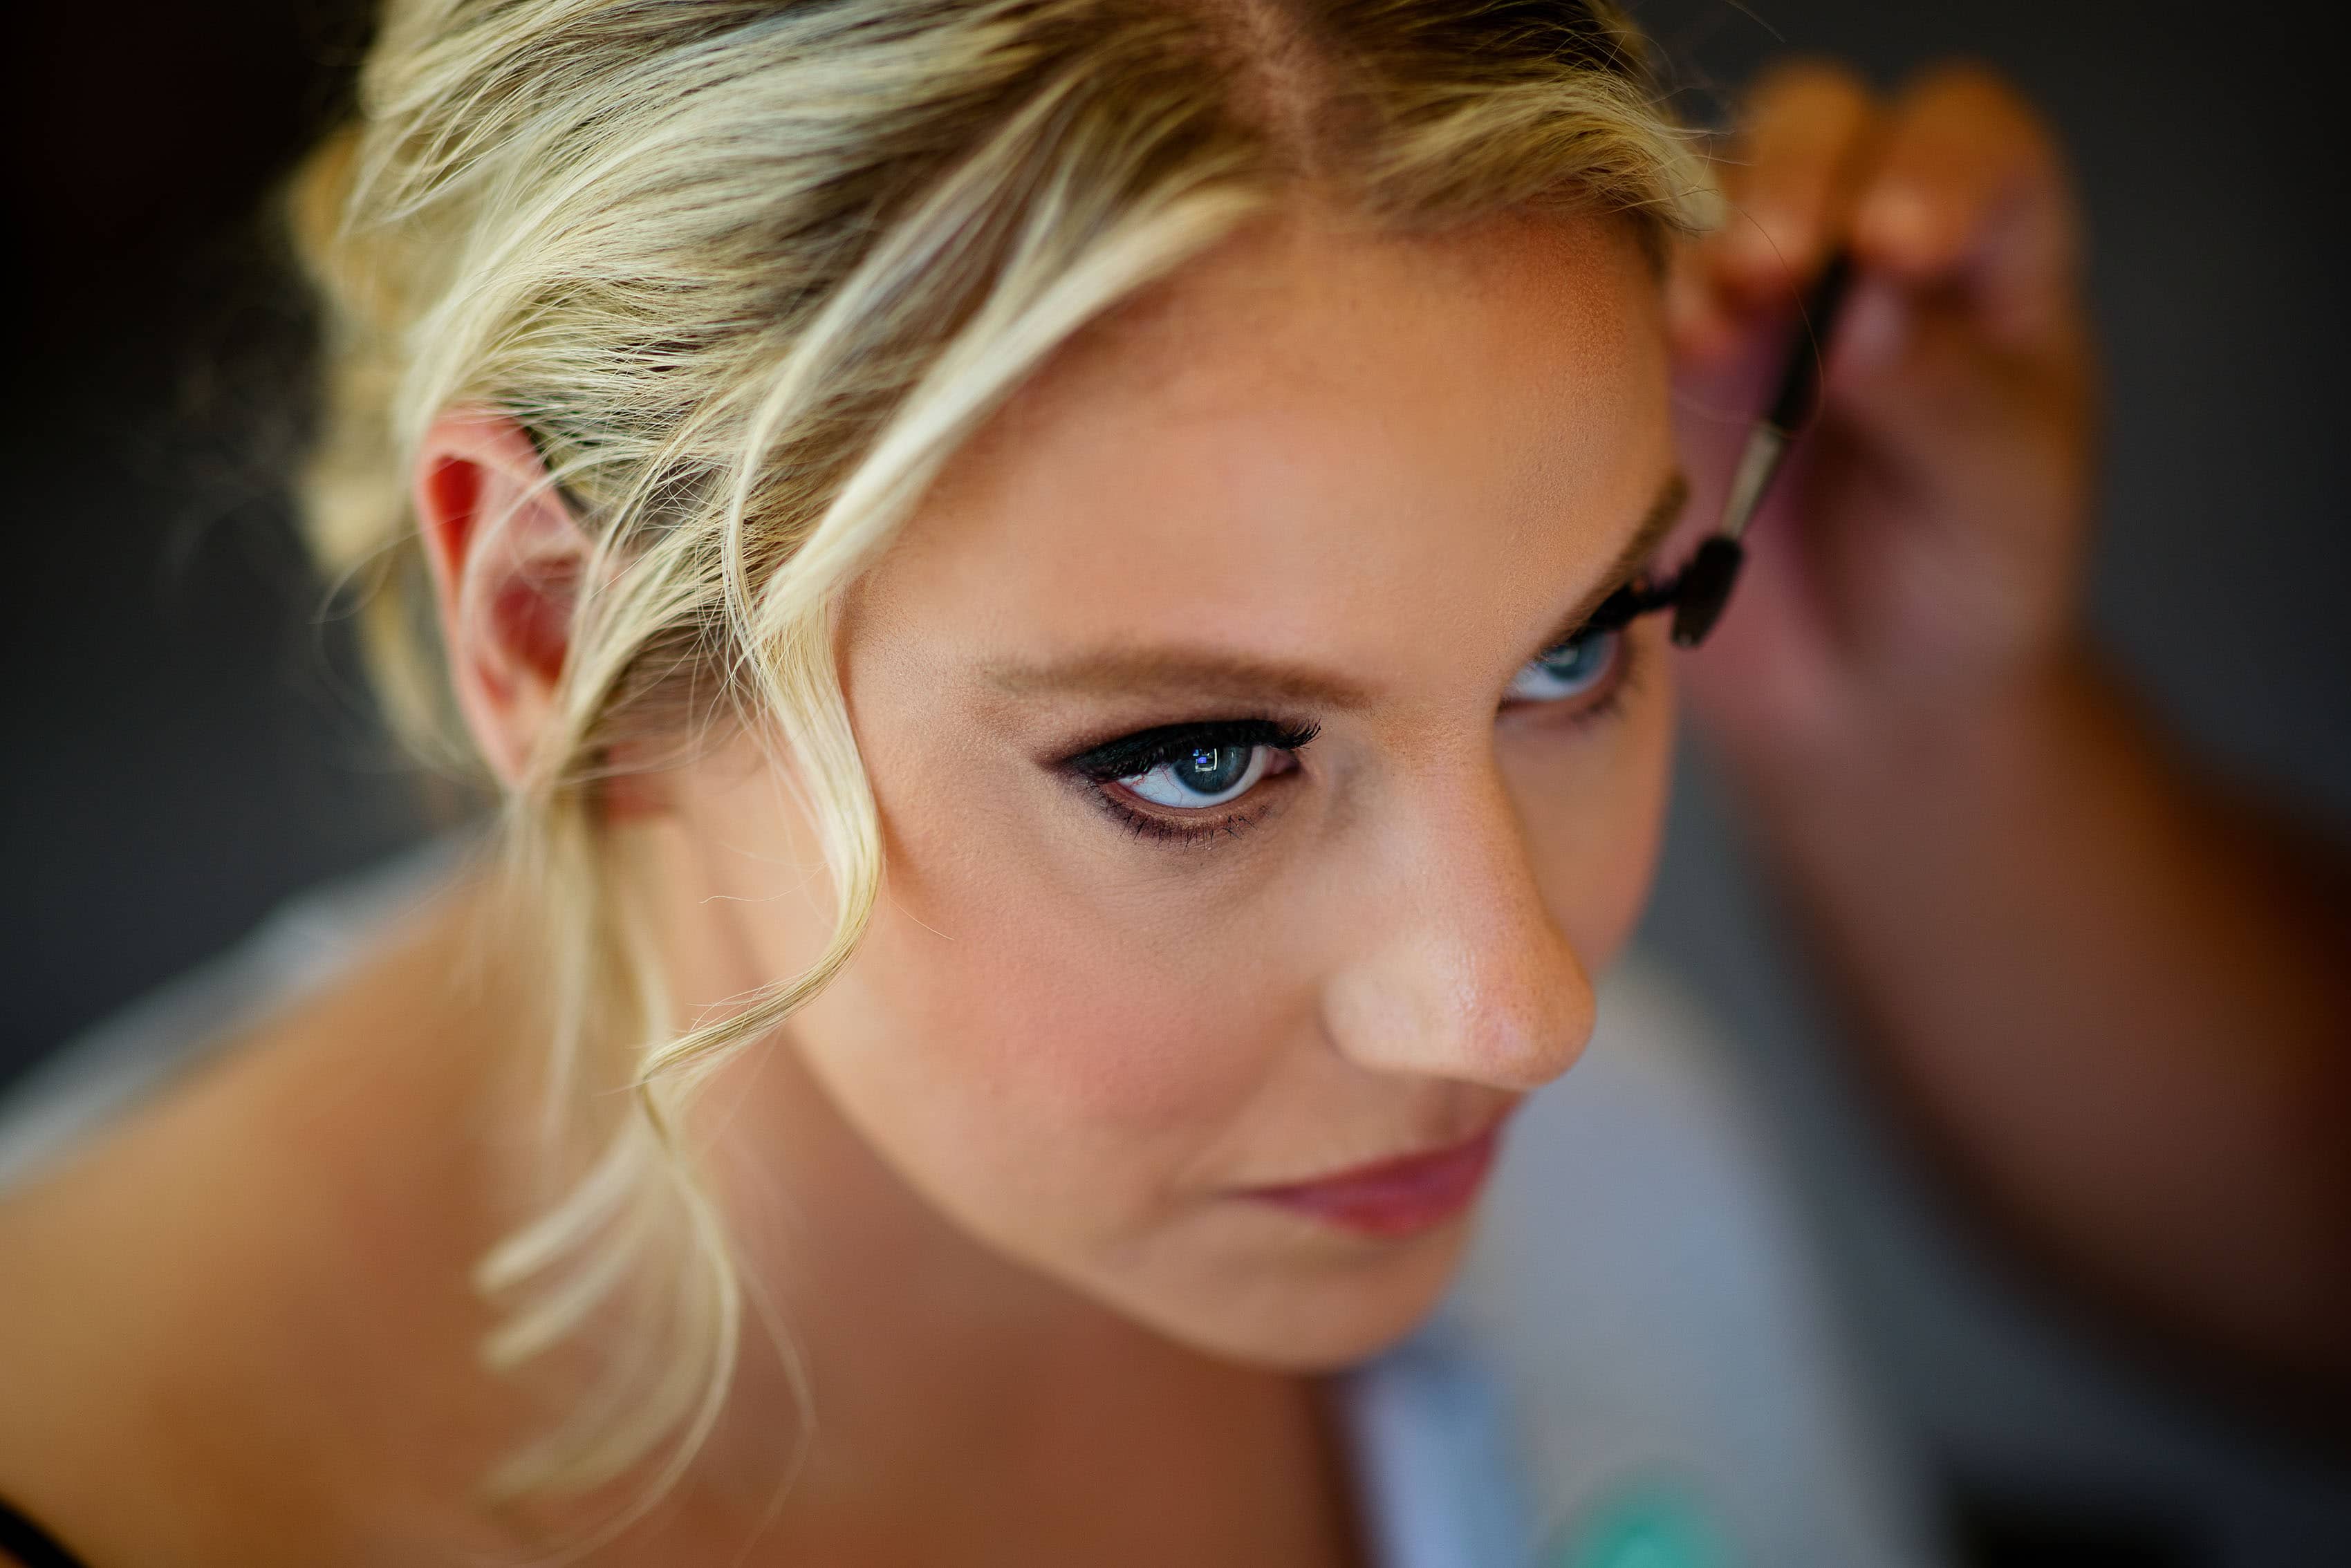 The bride gets mascara applied while getting ready